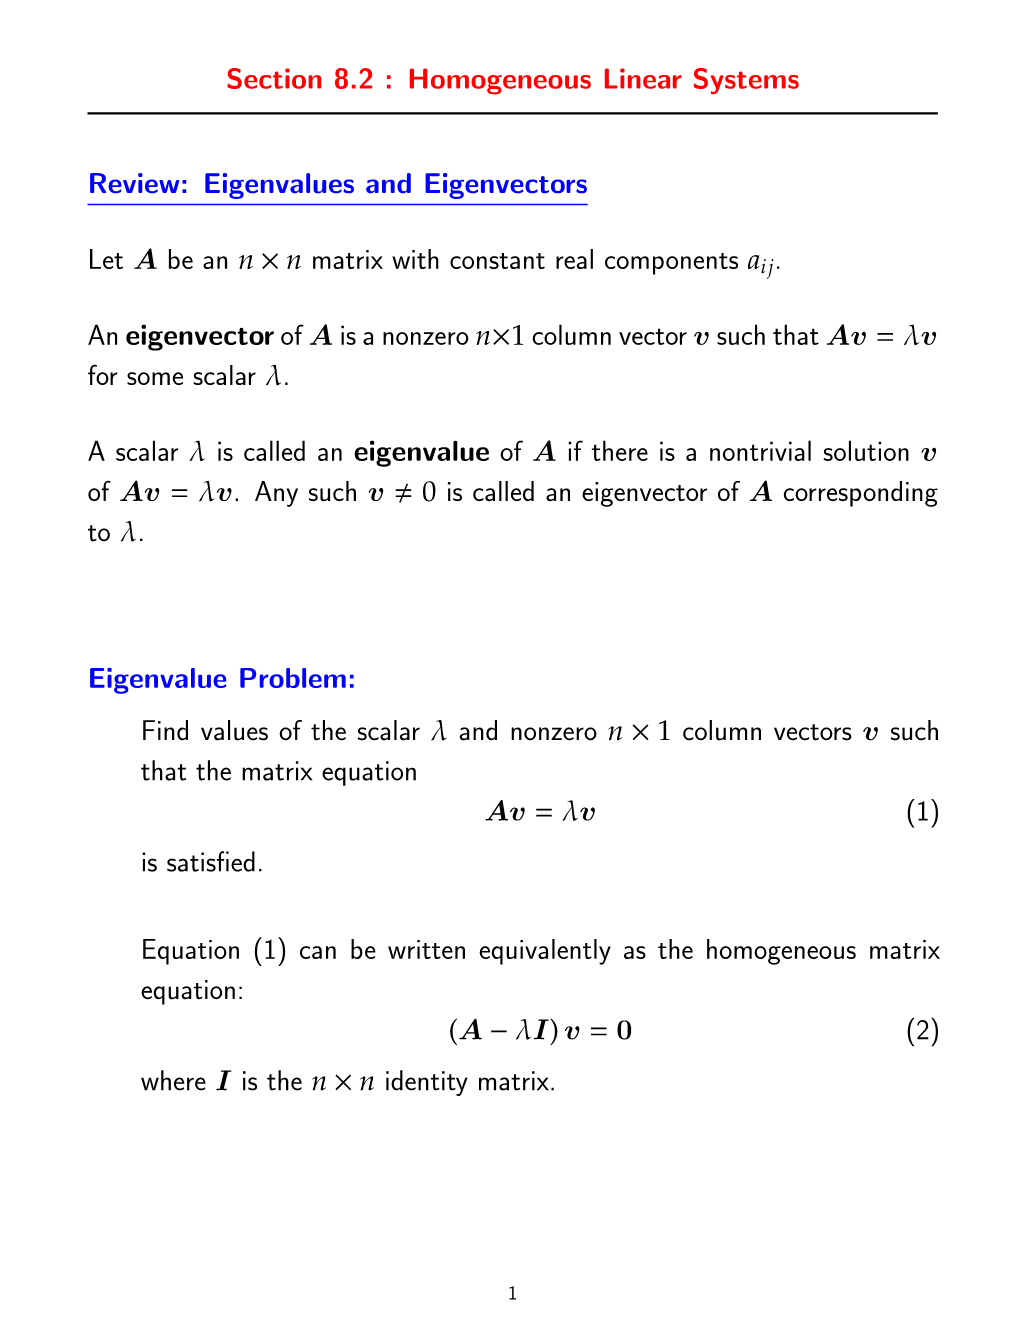 Section 8.2 : Homogeneous Linear Systems Review: Eigenvalues and Eigenvectors Let a Be an N × N Matrix with Constant Real Compo